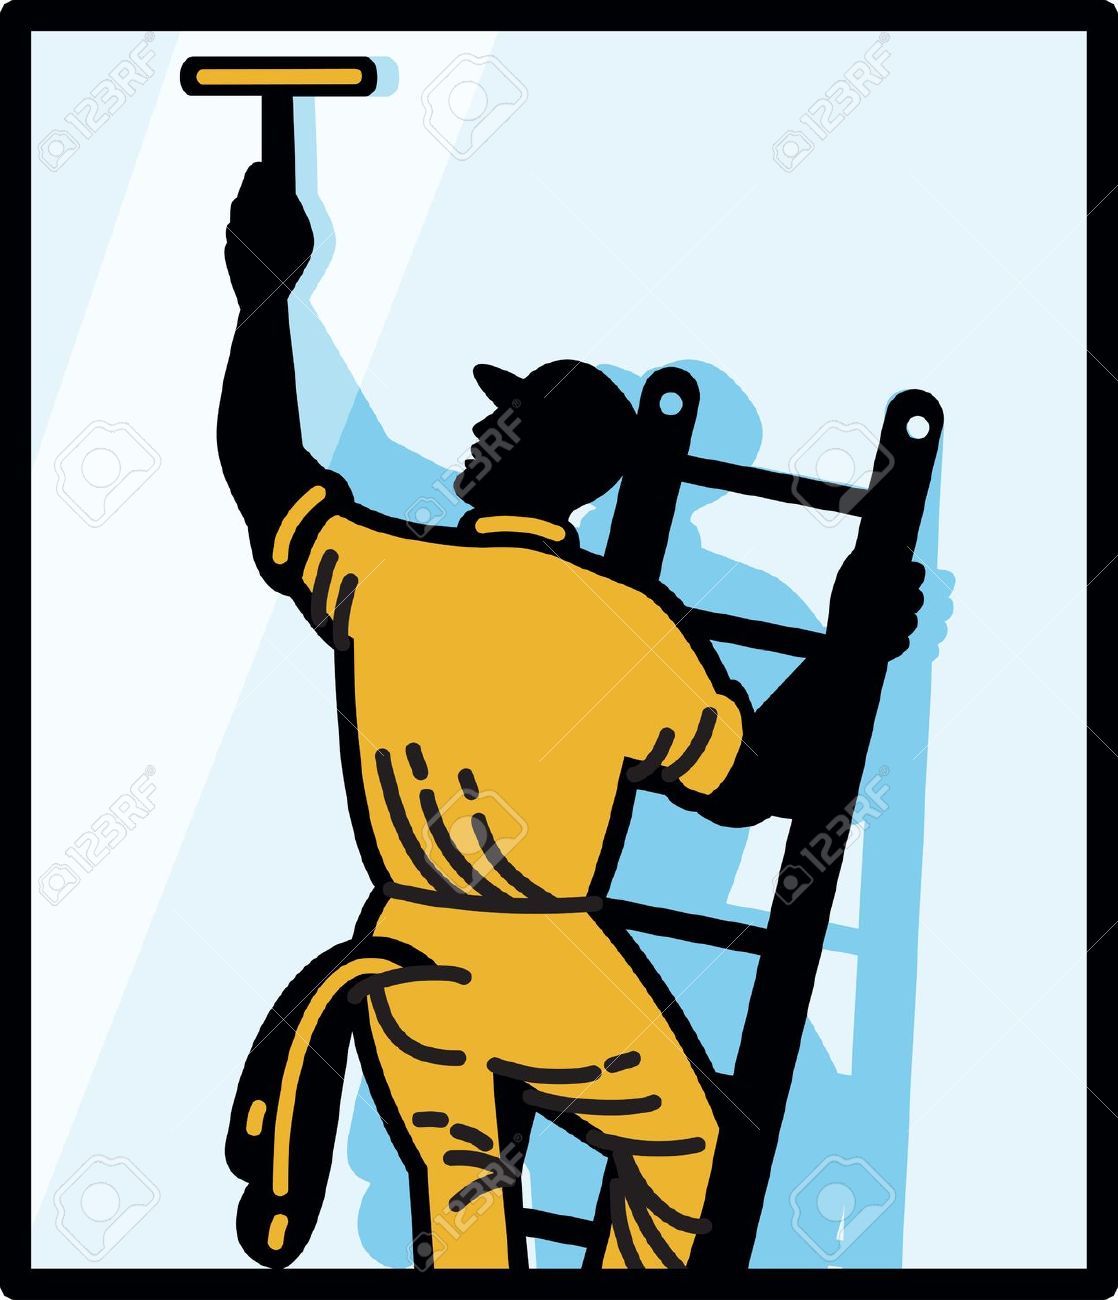 window cleaner clipart - photo #26